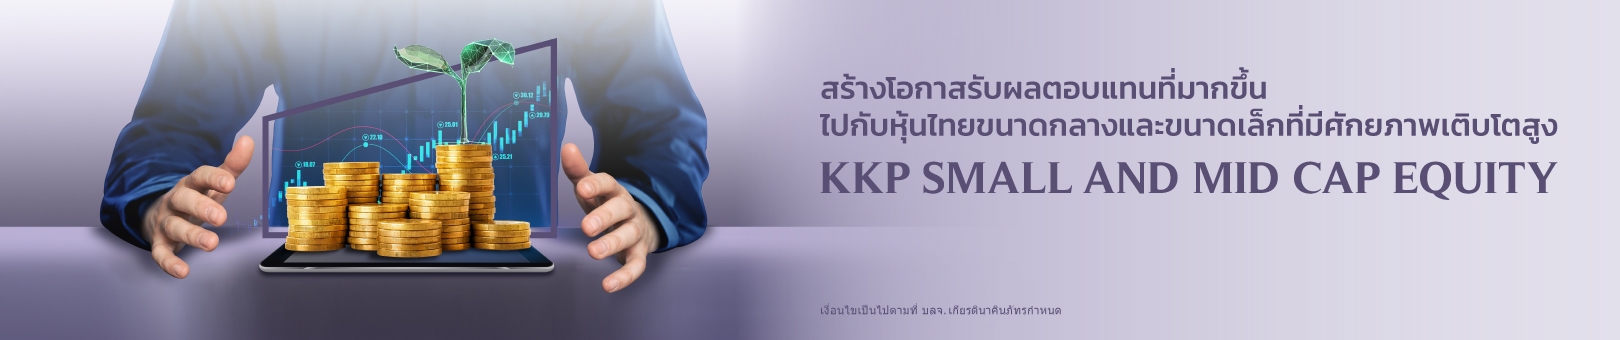 KKP-Small-and-Mid-Cap-Equity_1620x340